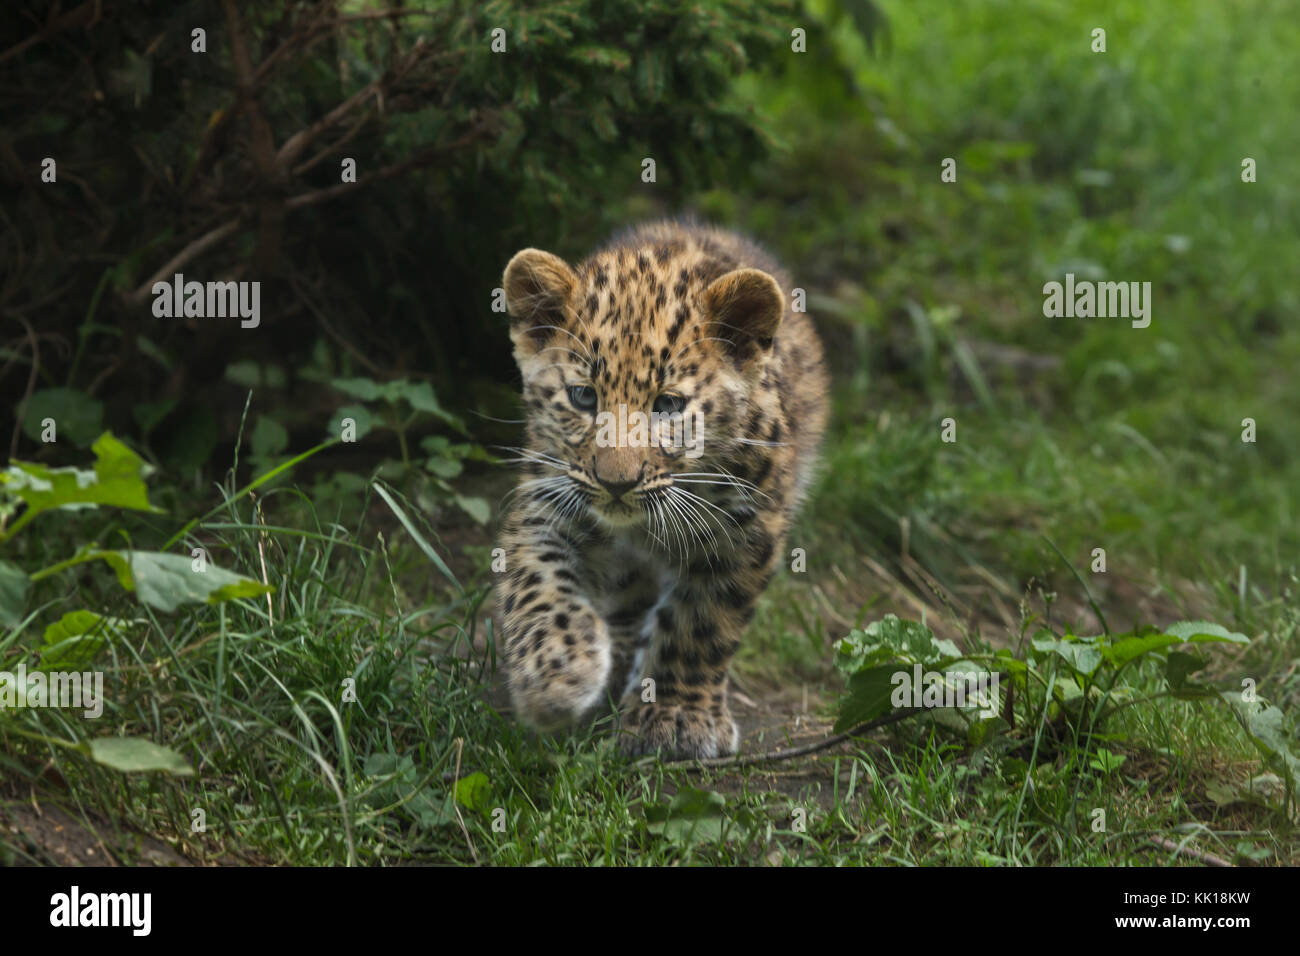 Three-month-old Amur leopard (Panthera pardus orientalis) at Leipzig Zoo in Leipzig, Saxony, Germany. Two Amur leopards called Akeno and Zivon were born on 22 April 2017. Stock Photo